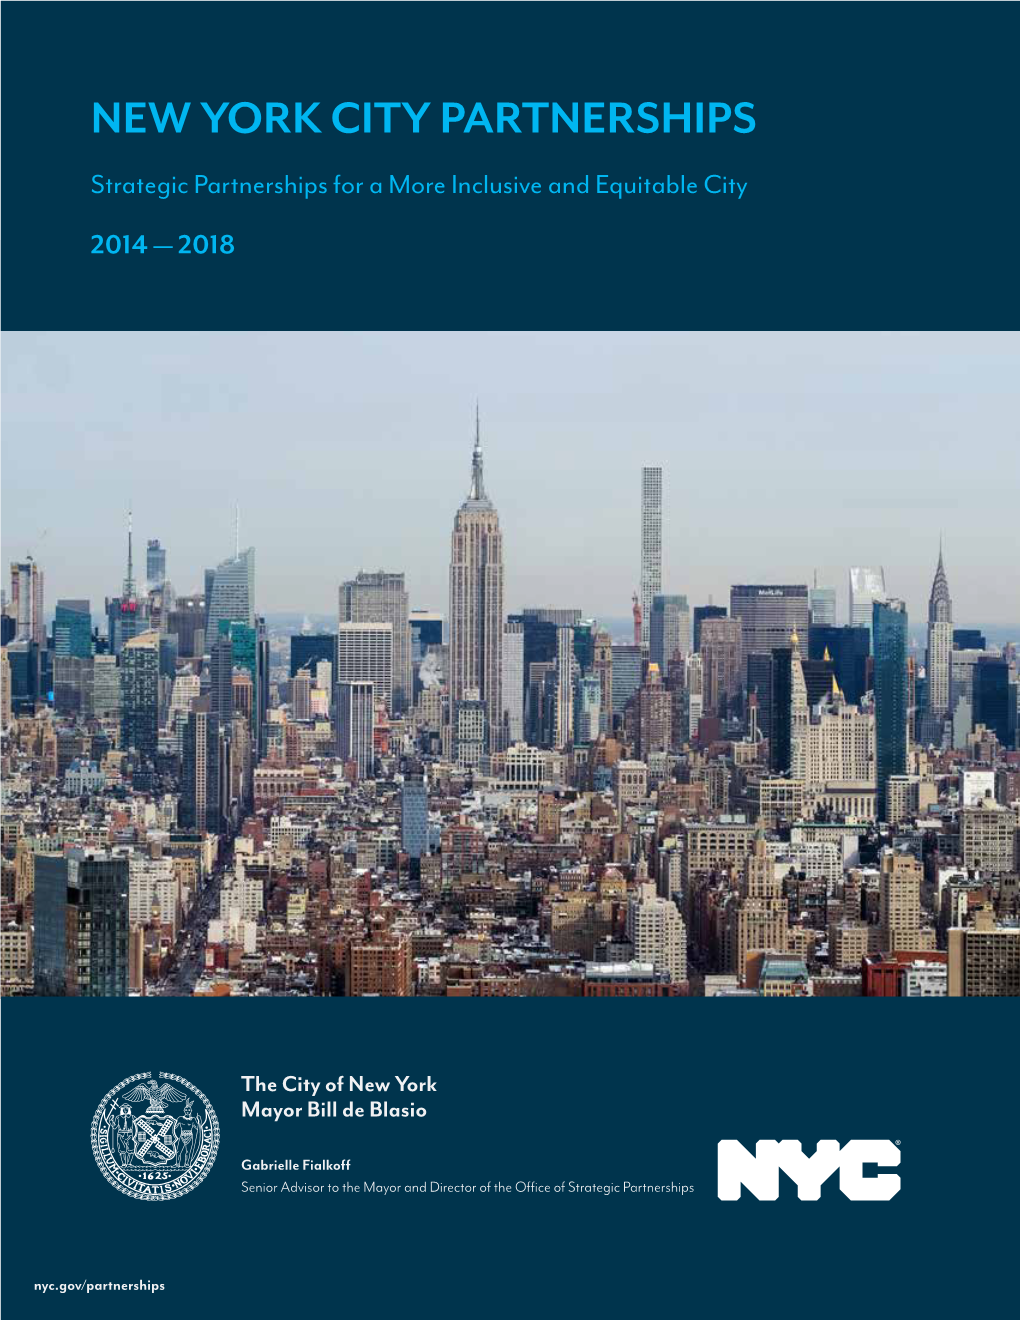 NEW YORK CITY PARTNERSHIPS Strategic Partnerships for a More Inclusive and Equitable City